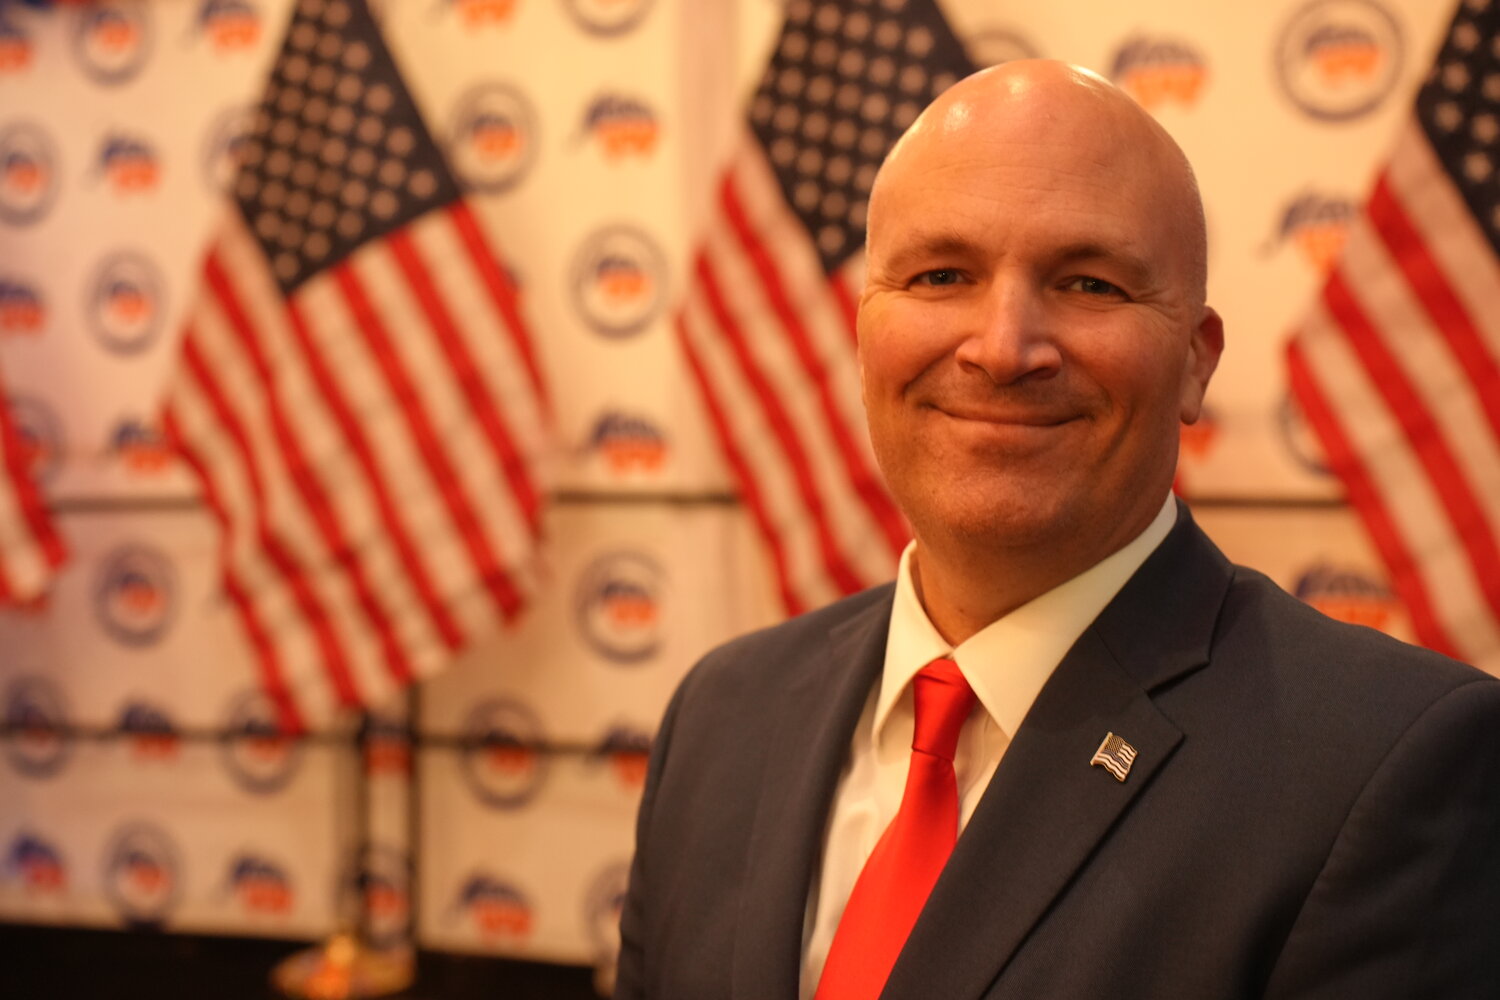 Chris Carini was re-elected to his second term as councilman in the Town of Hempstead 5th District.